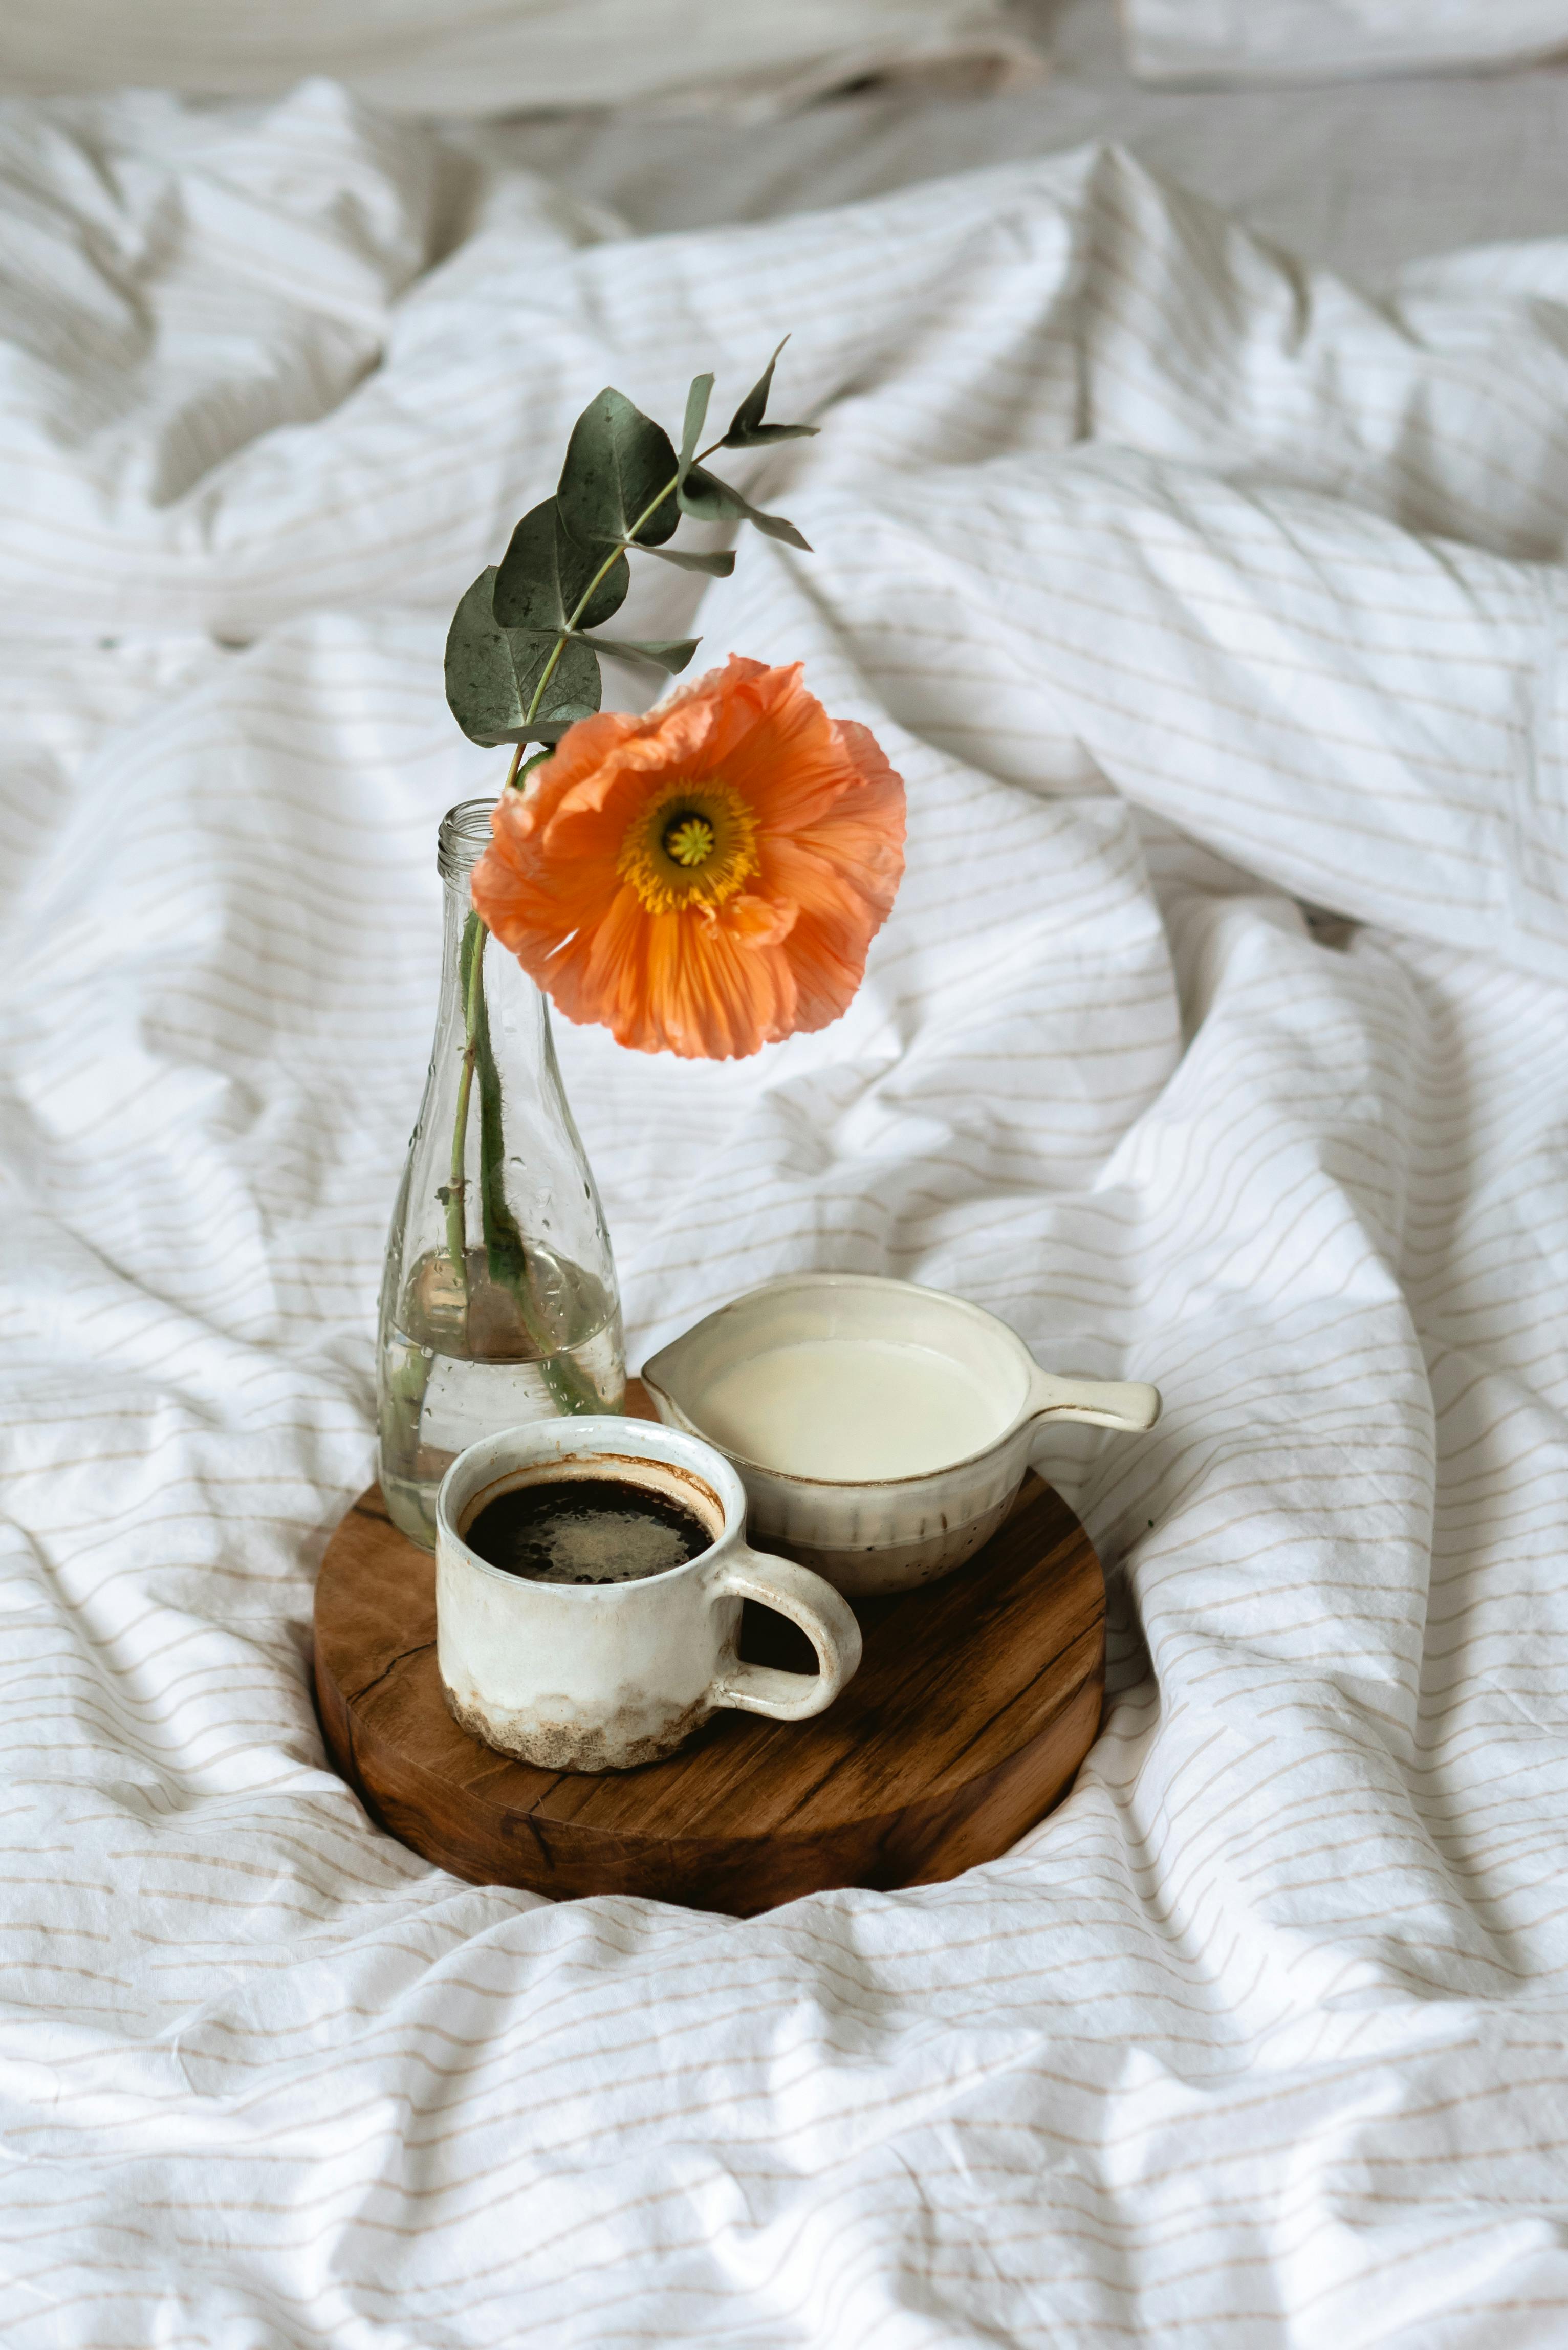 coffee cup with milk jug and flower vase arranged on tray on bed